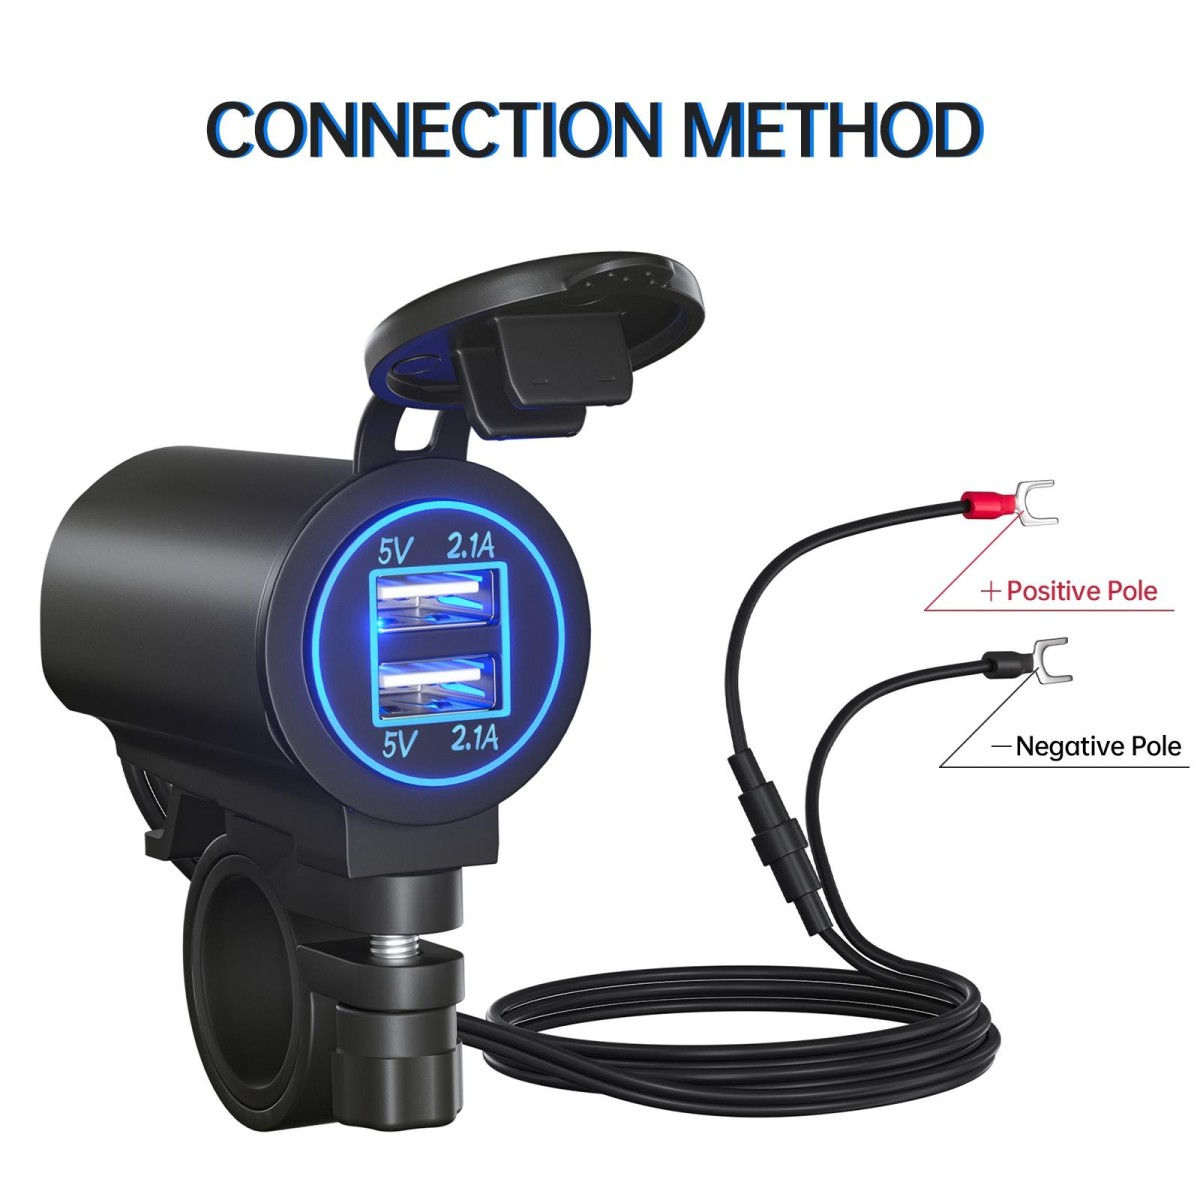 ZH-526I1 Car / Motorcycle 4.2A Dual USB Port Car Charger(Blue Light)